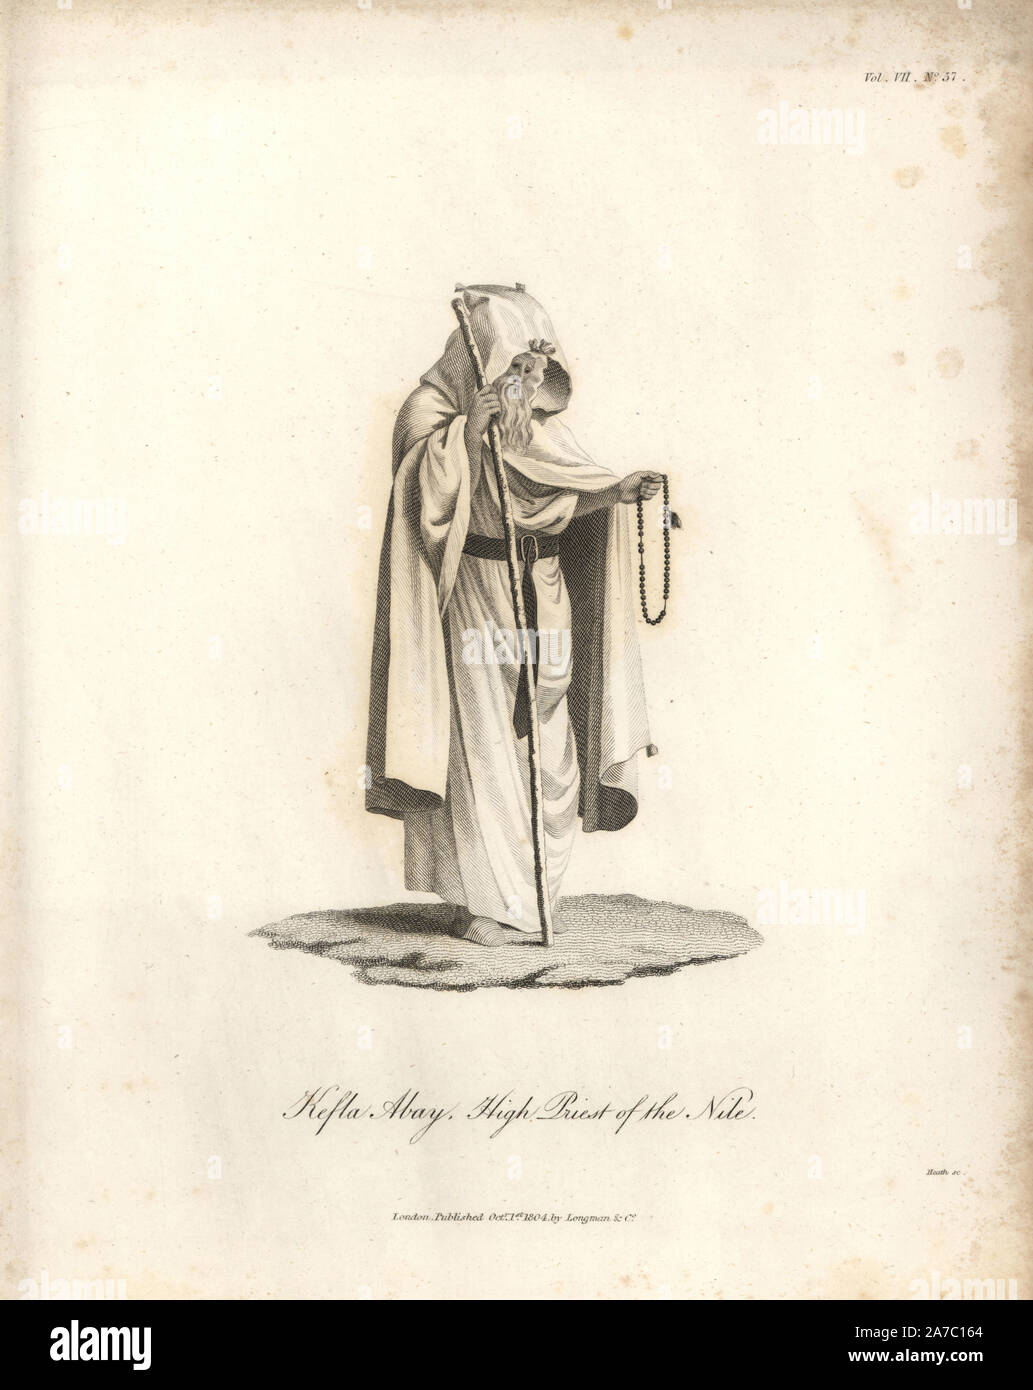 Kefla Abay, high priest of the Nile, in robes with staff and prayer beads. Copperplate engraving from James Bruce's 'Travels to Discover the Source of the Nile, in the years 1768, 1769, 1770, 1771, 1772 and 1773,' London, 1790. James Bruce (1730-1794) was a Scottish explorer and travel writer who spent more than 12 years in North Africa and Ethiopia. Engraved by Heath after an original drawing by Bruce. Stock Photo